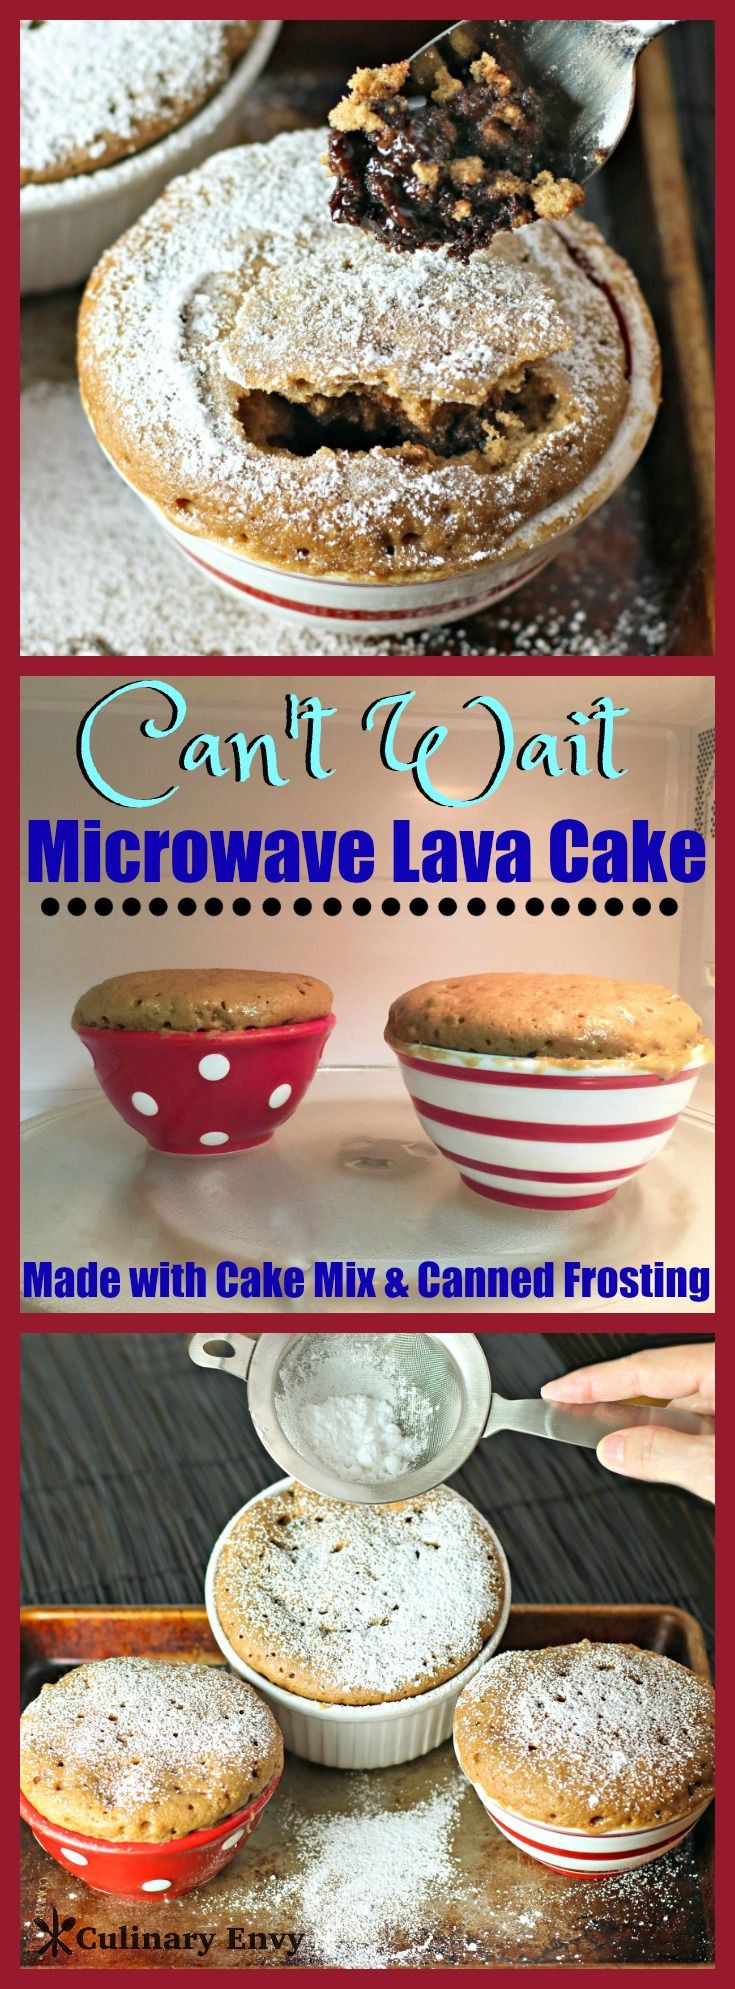 Lava Cake Recipe Microwave
 Can’t Wait Microwave Lava Cake is ready in only 7 minutes